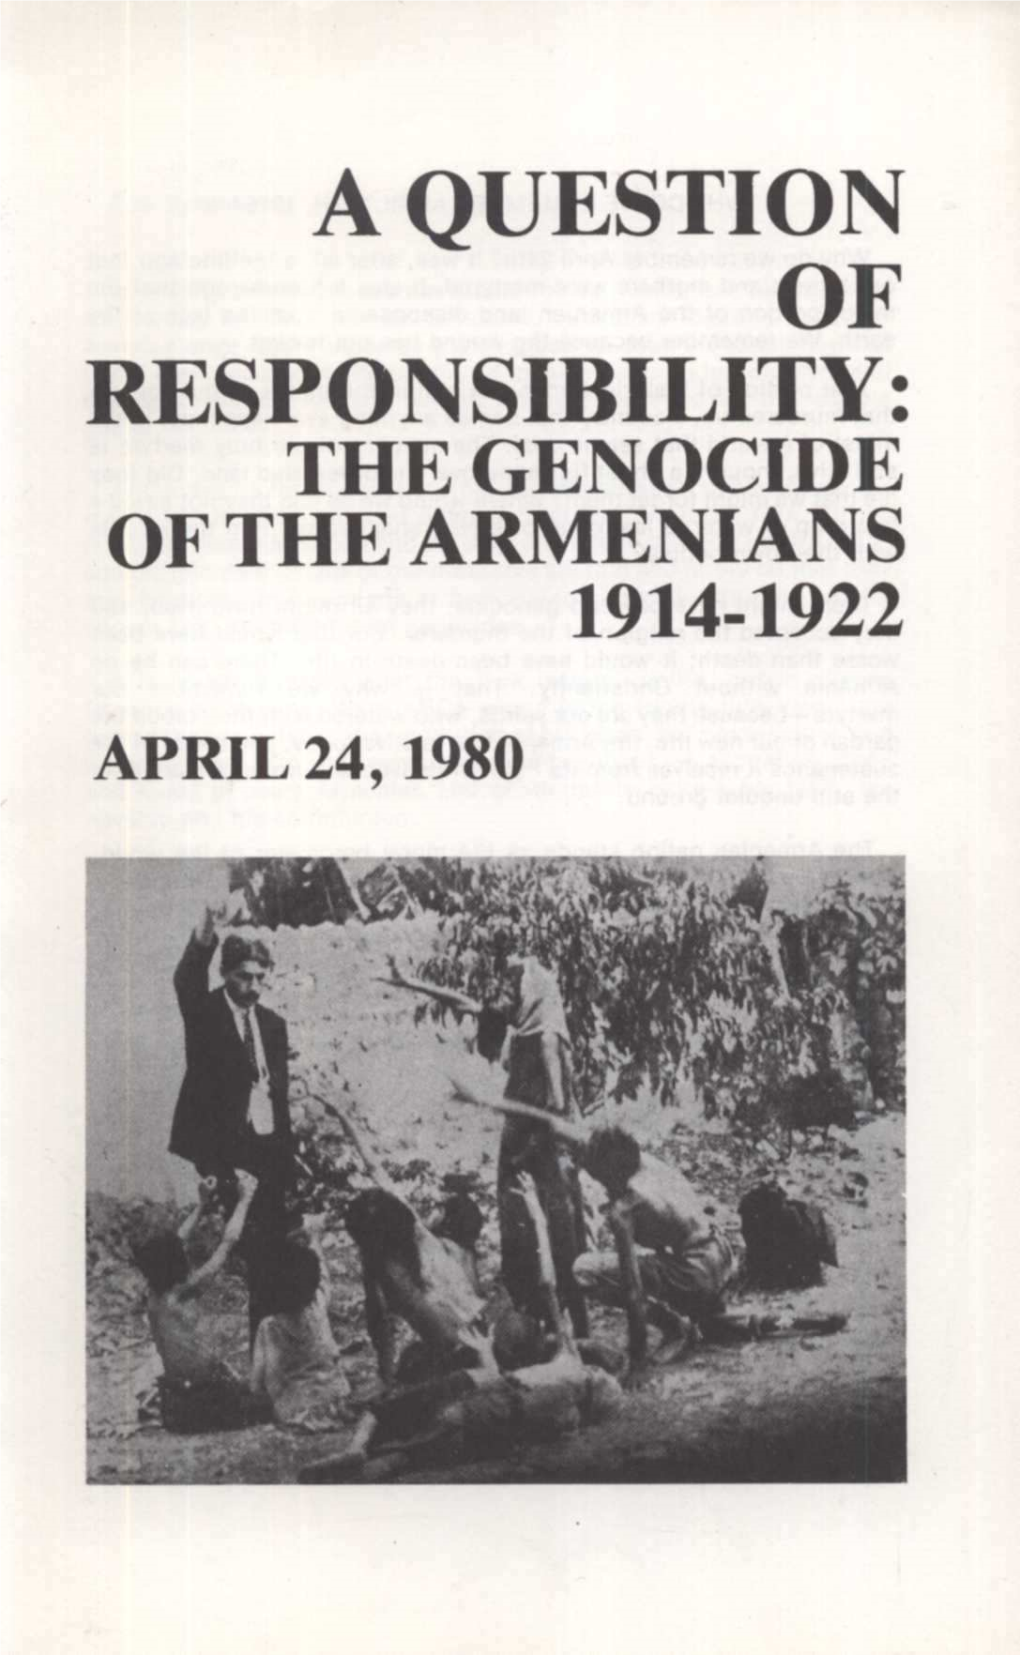 A Question of Responsibility: the Genocide of the Armenians 1914-1922